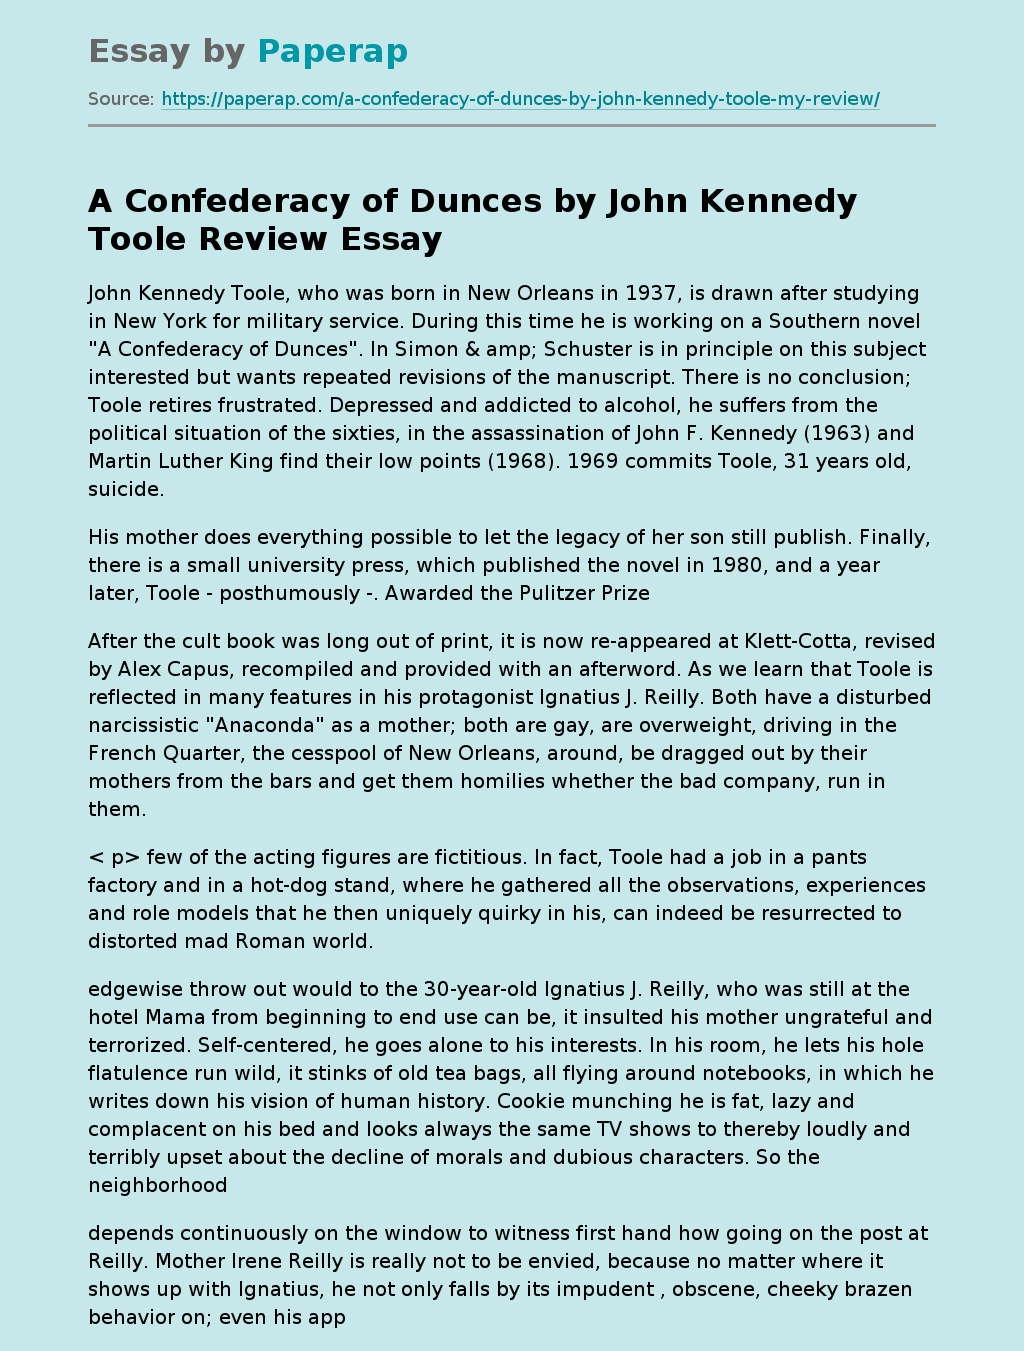 "A Confederacy of Dunces" by John Kennedy Toole. Review